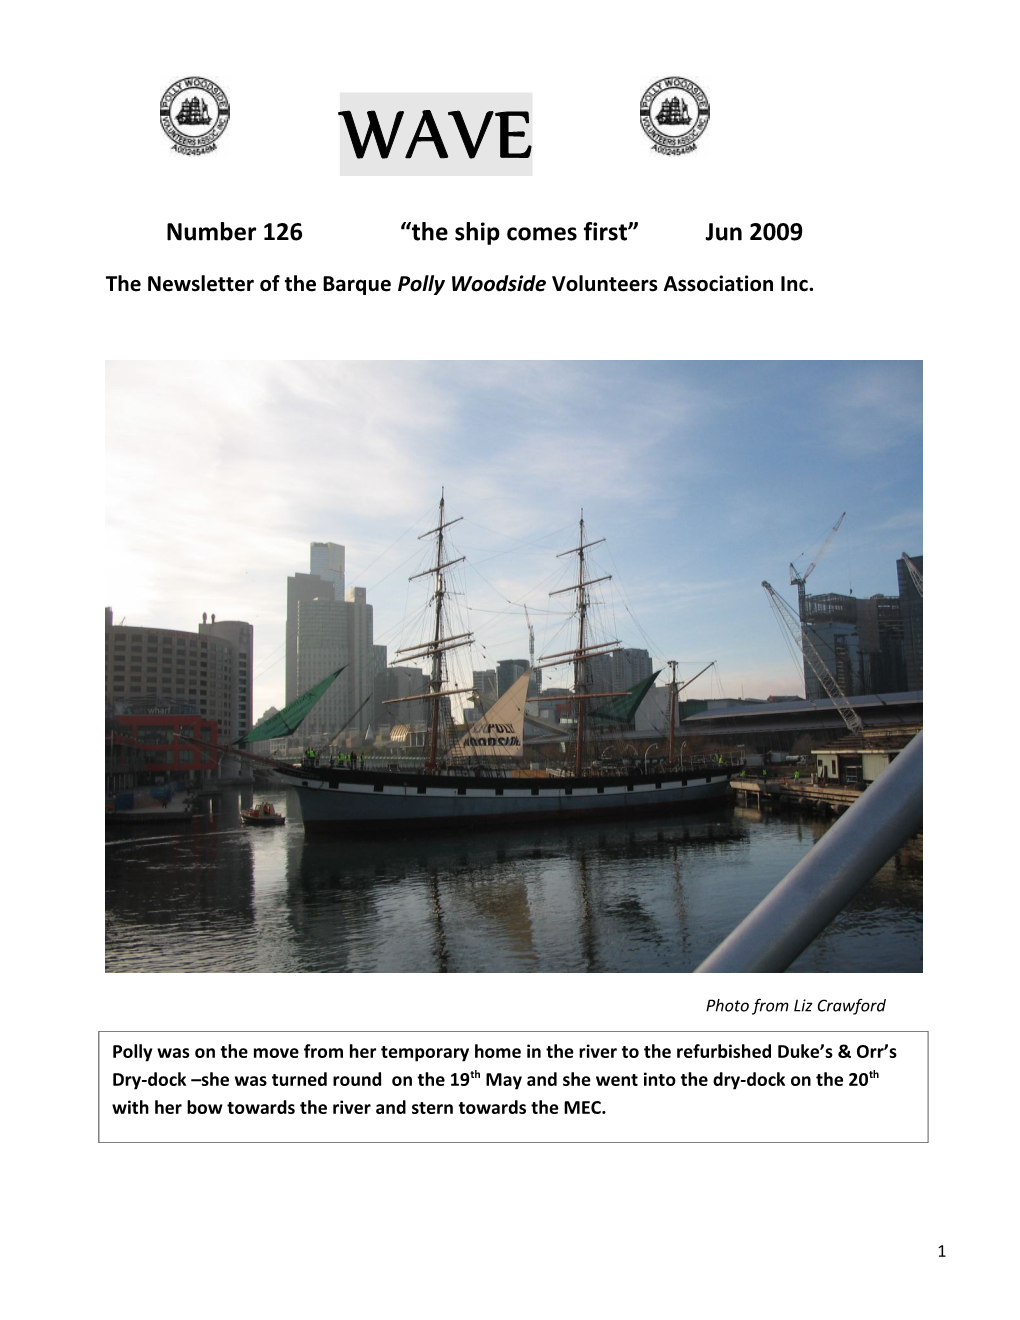 The Newsletter of the Barque Polly Woodside Volunteers Association Inc